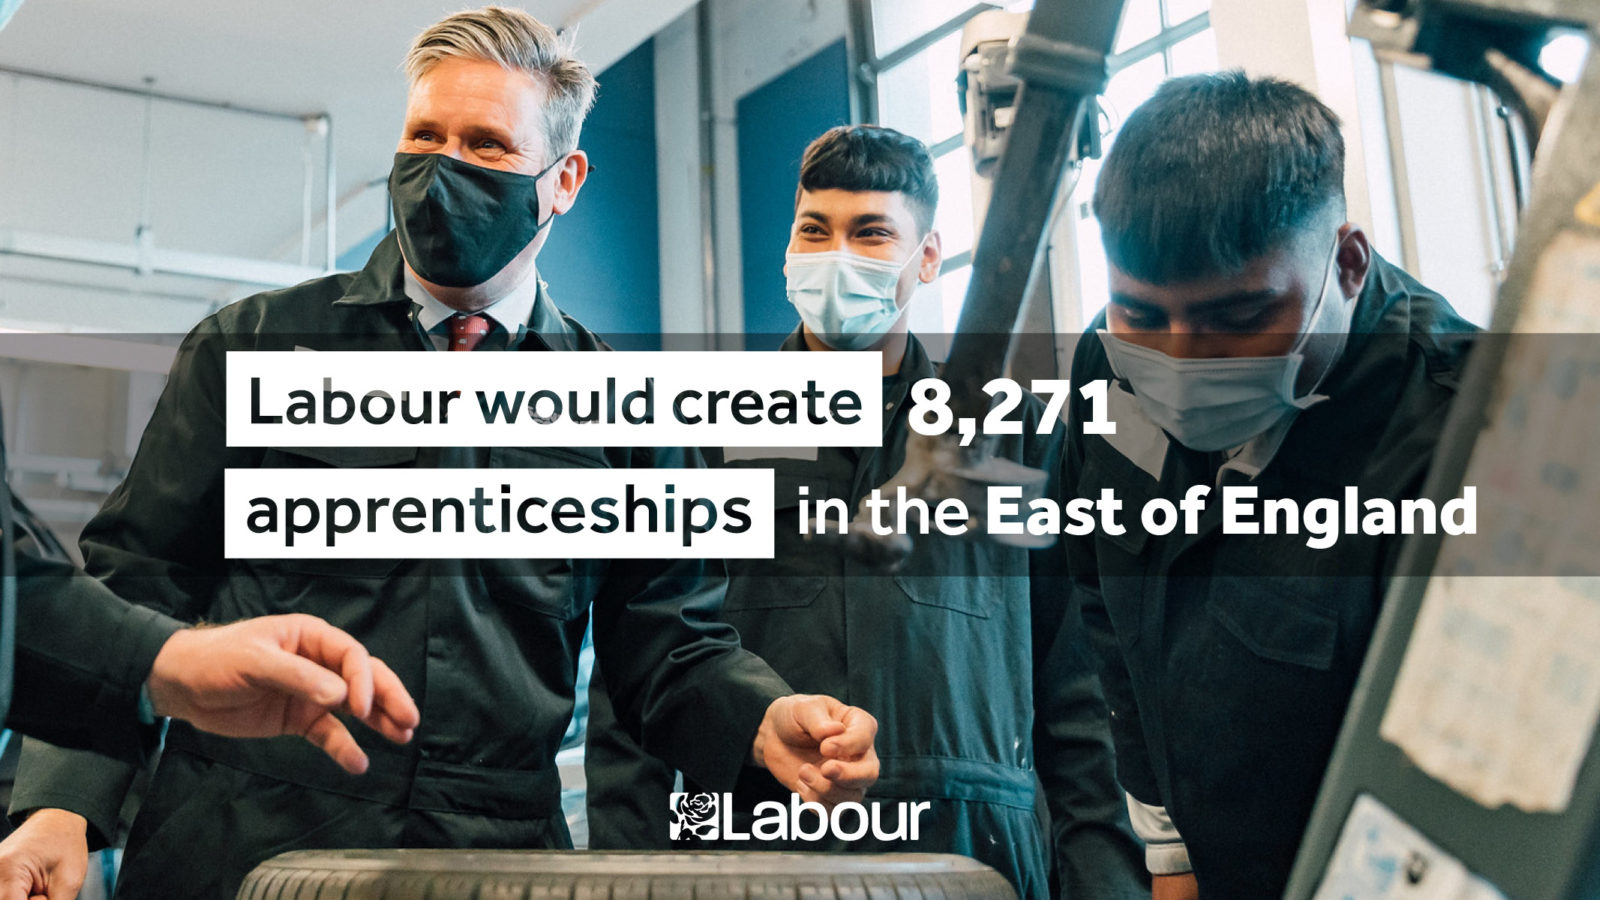 Labour would create 8271 apprenticeships in the East of England